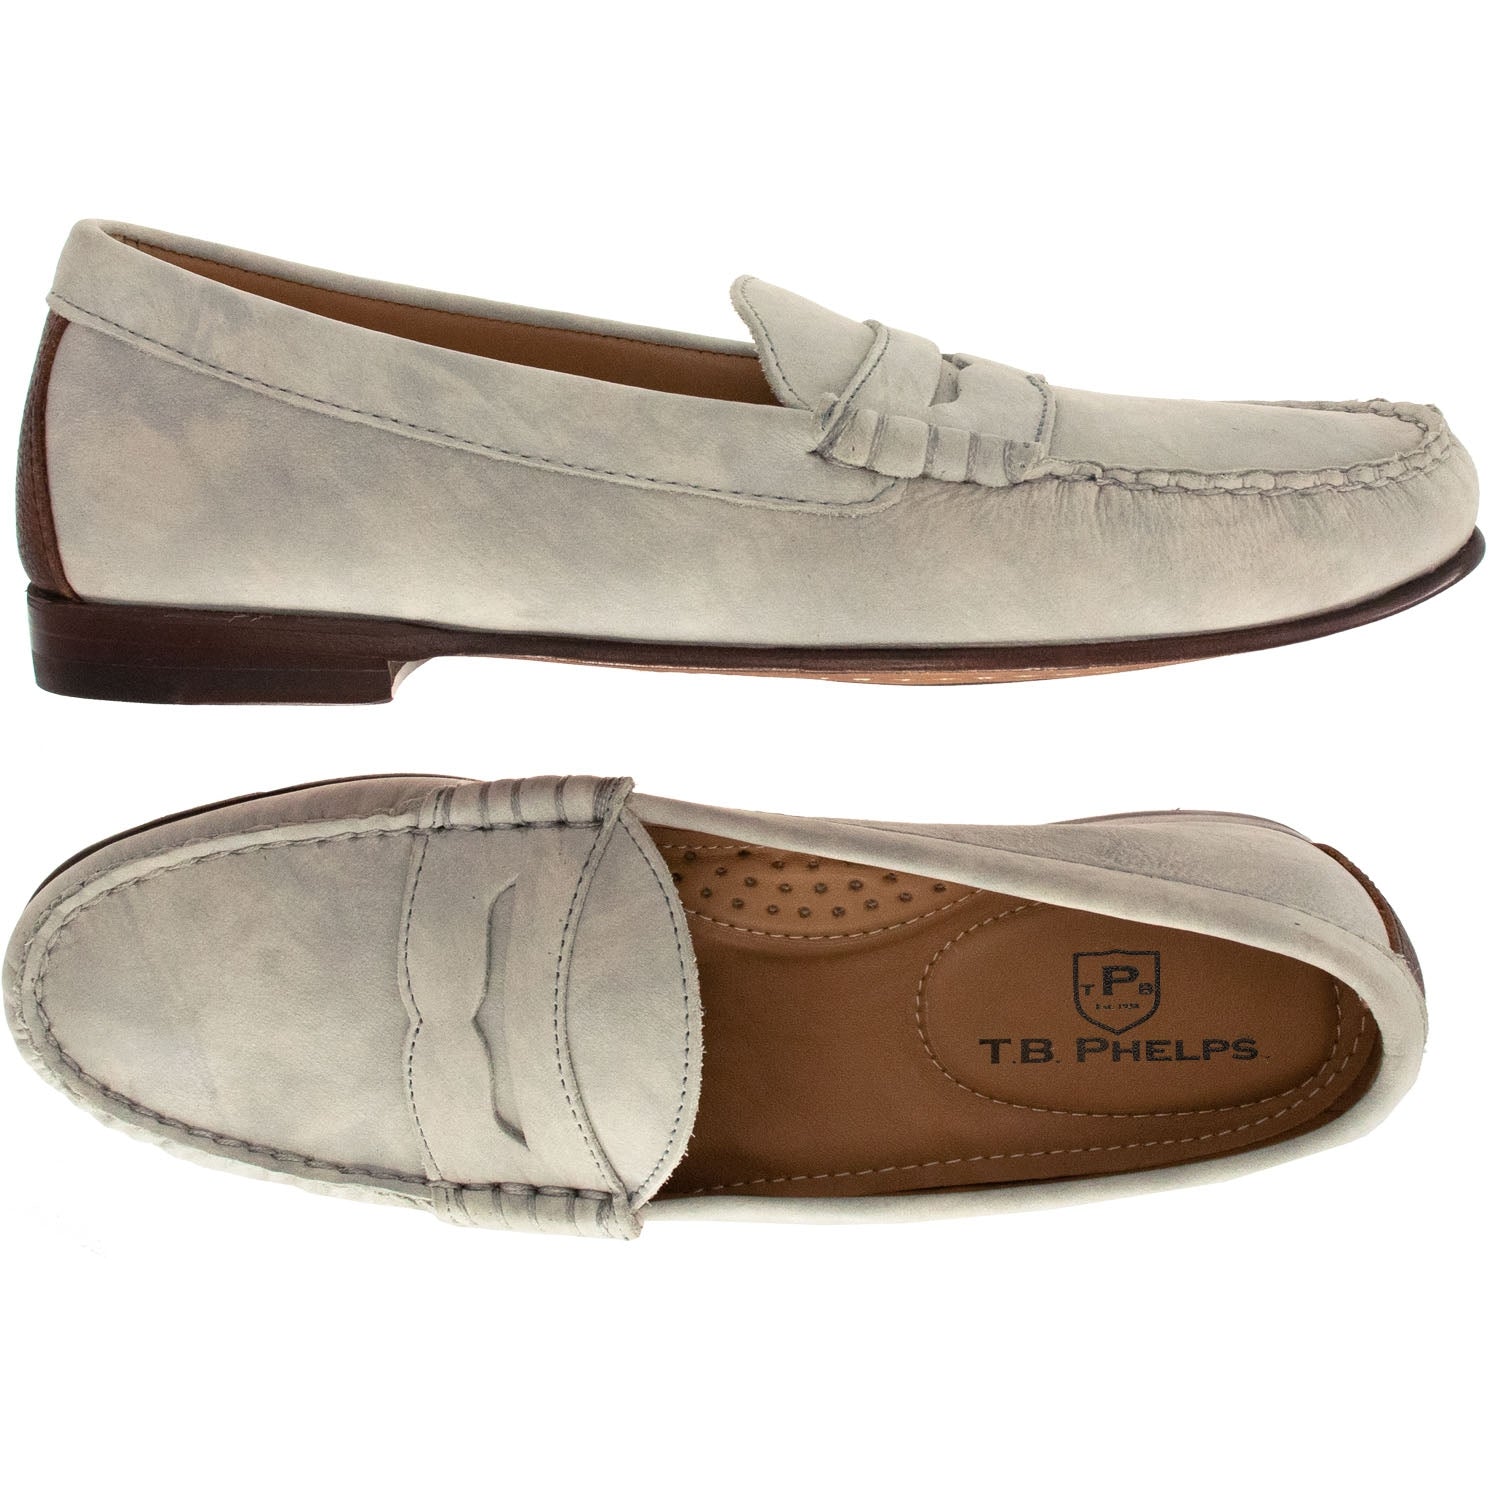 Preston Washed Calfskin Penny Loafer in Grey by T.B. Phelps